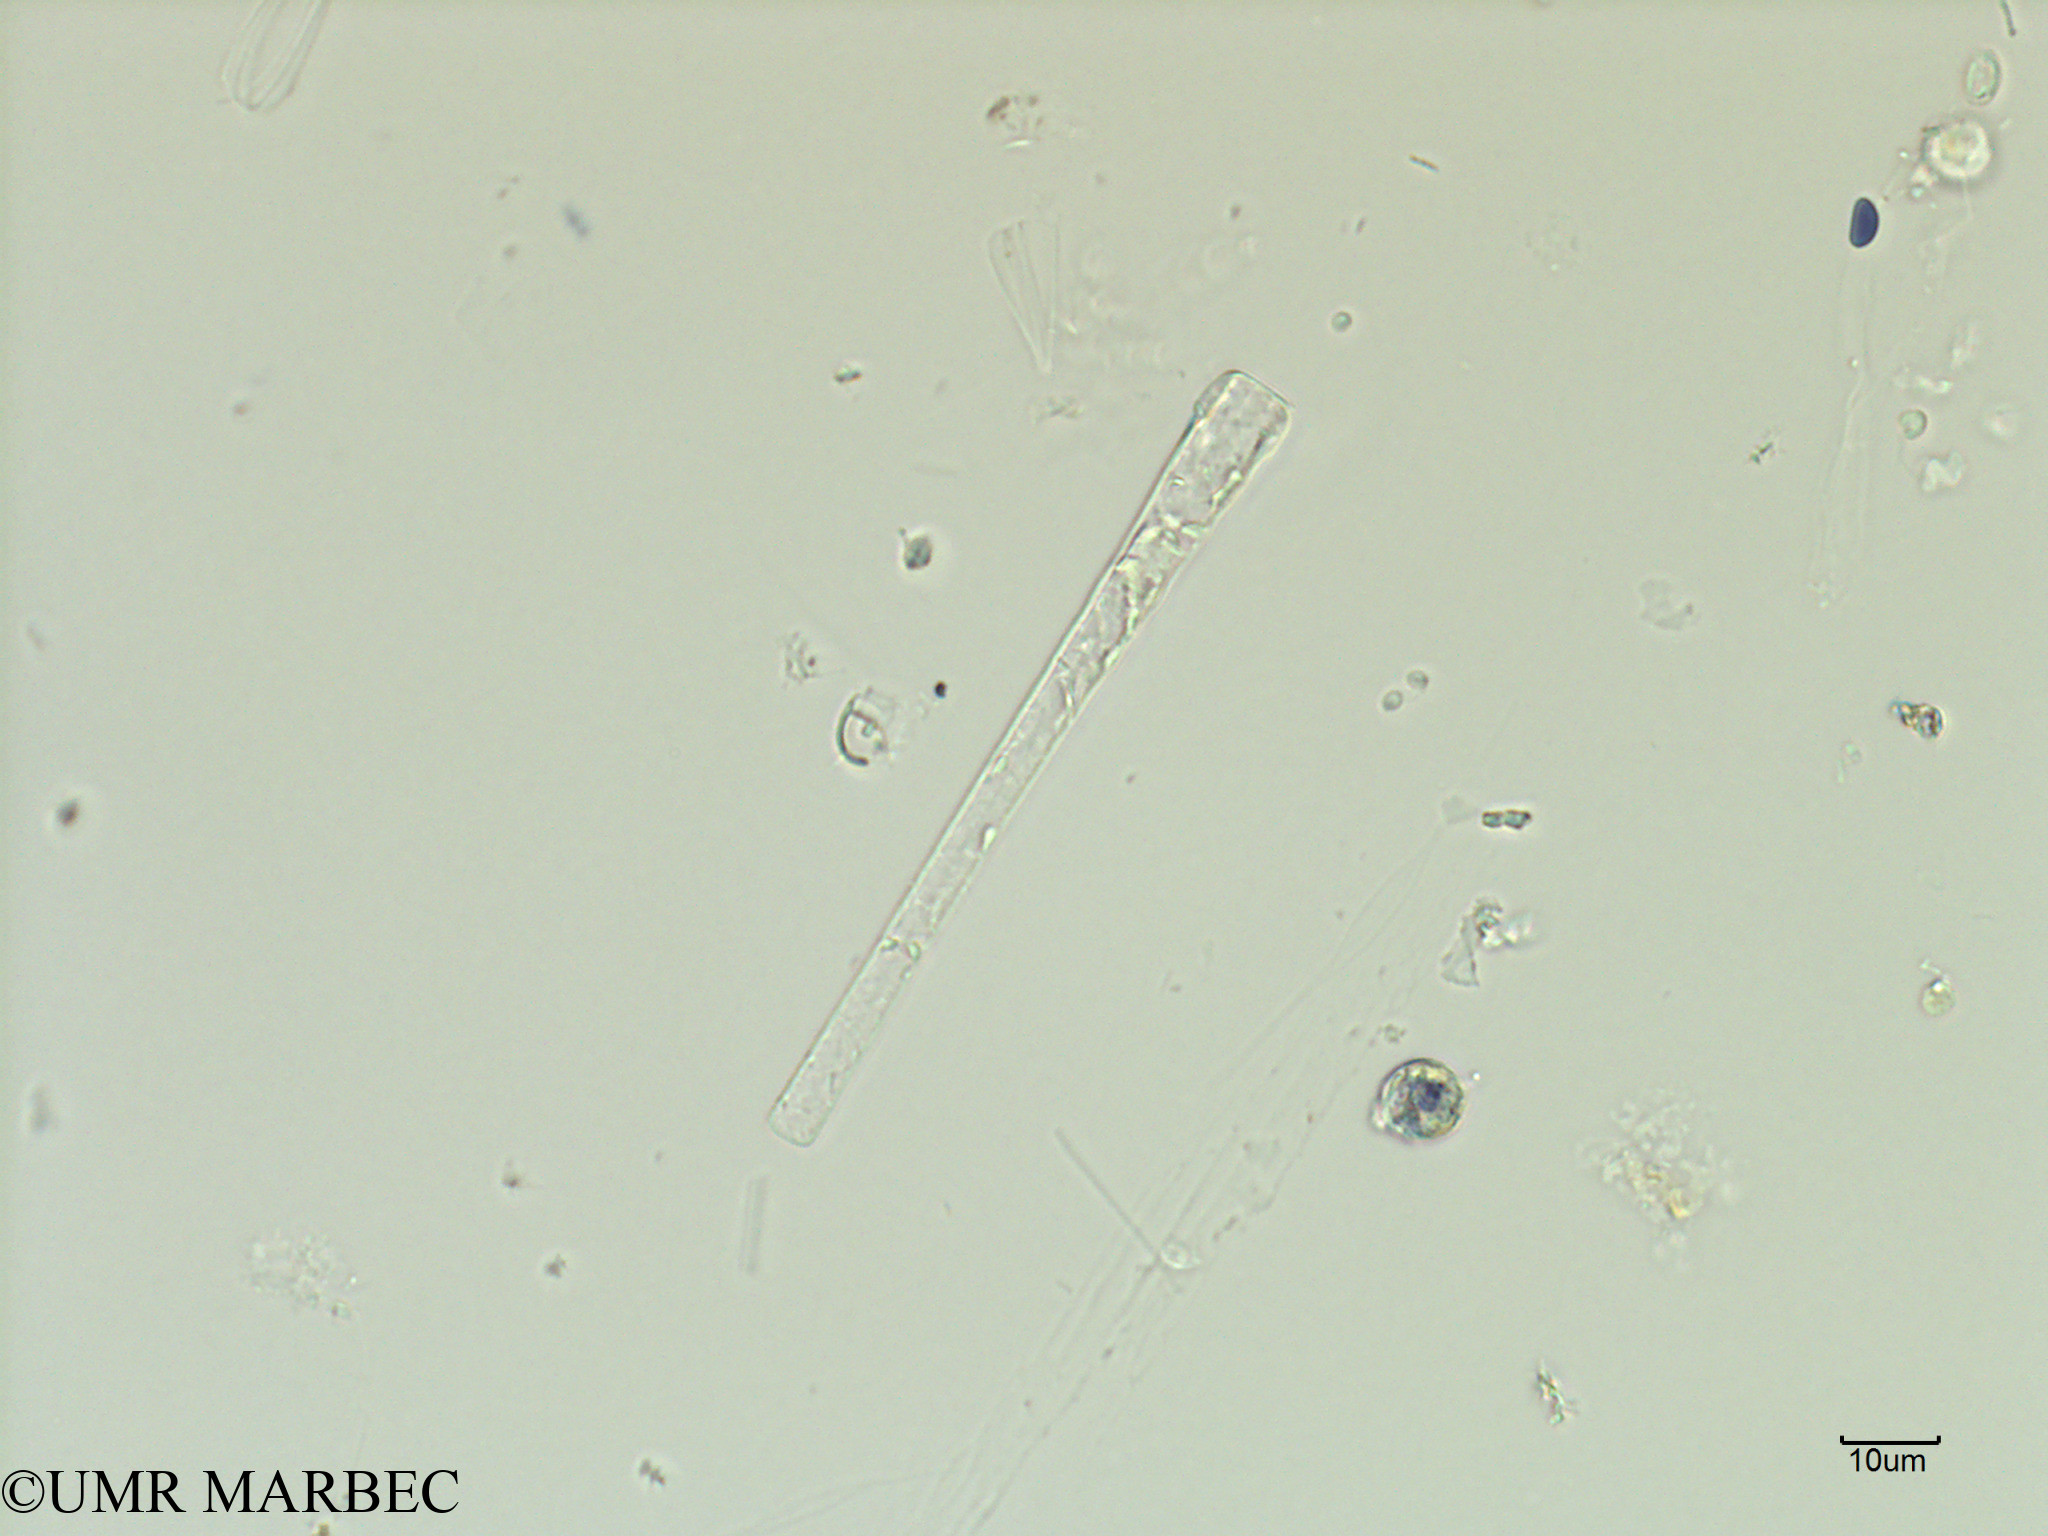 phyto/Scattered_Islands/iles_glorieuses/SIREME May 2016/Asterionella bleakeleyi var. notata (SIREME-Glorieuses2016-GLO5surf-121016-diatomée-4)(copy).jpg